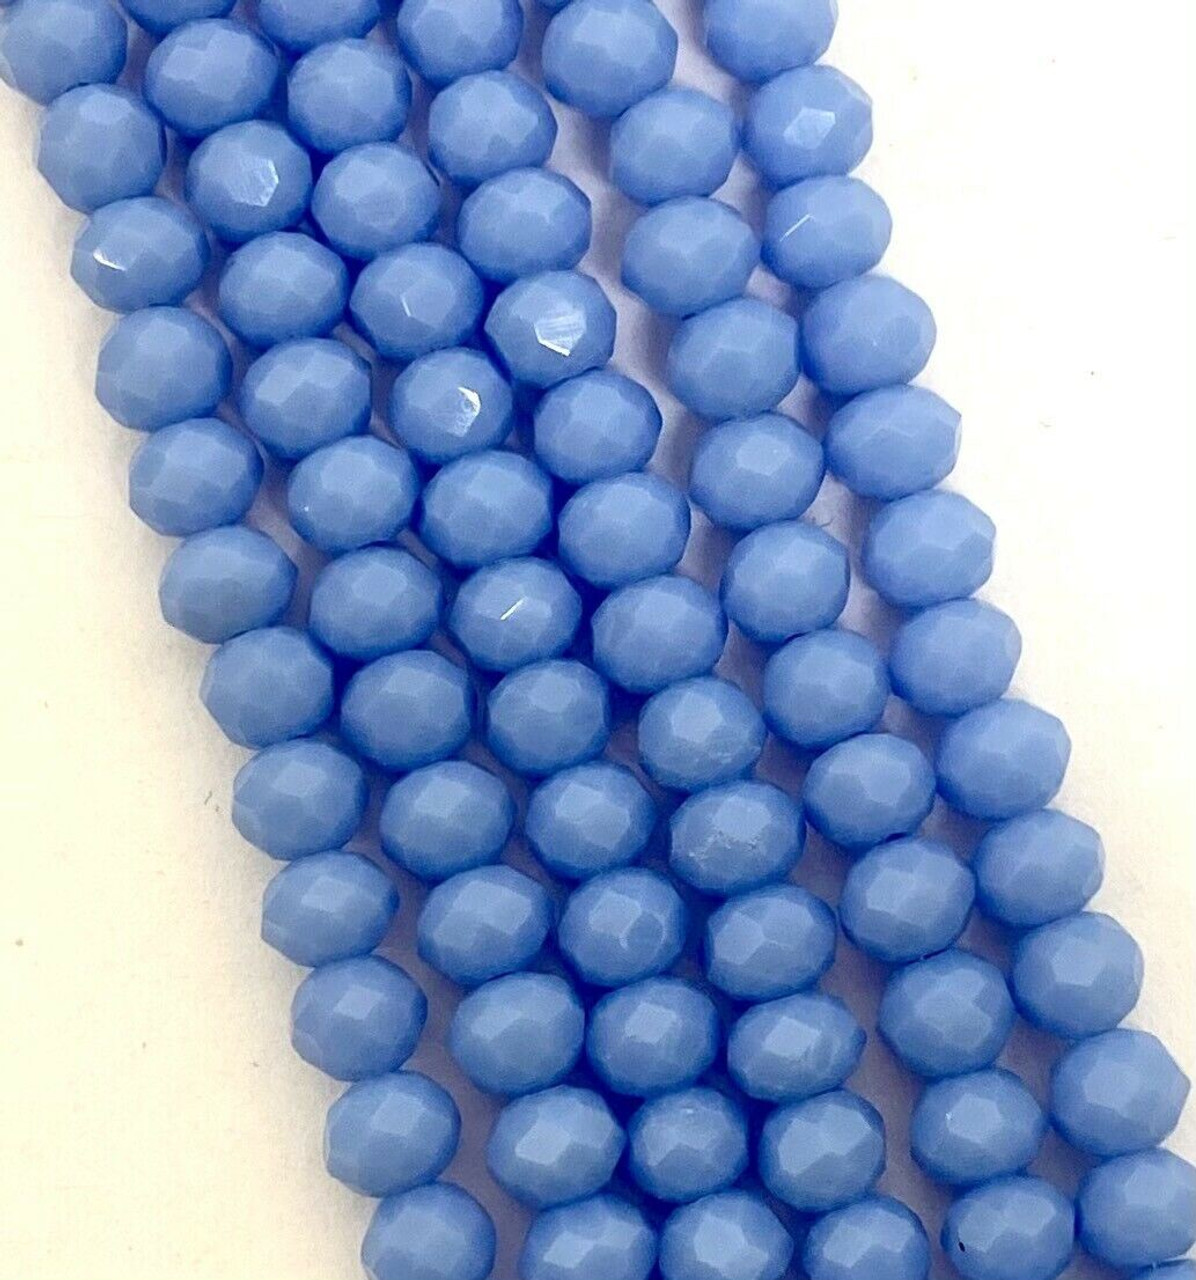 8x6mm Faceted Glass Rondelles - LIGHT BLUE OPAQUE - approx 72 beads